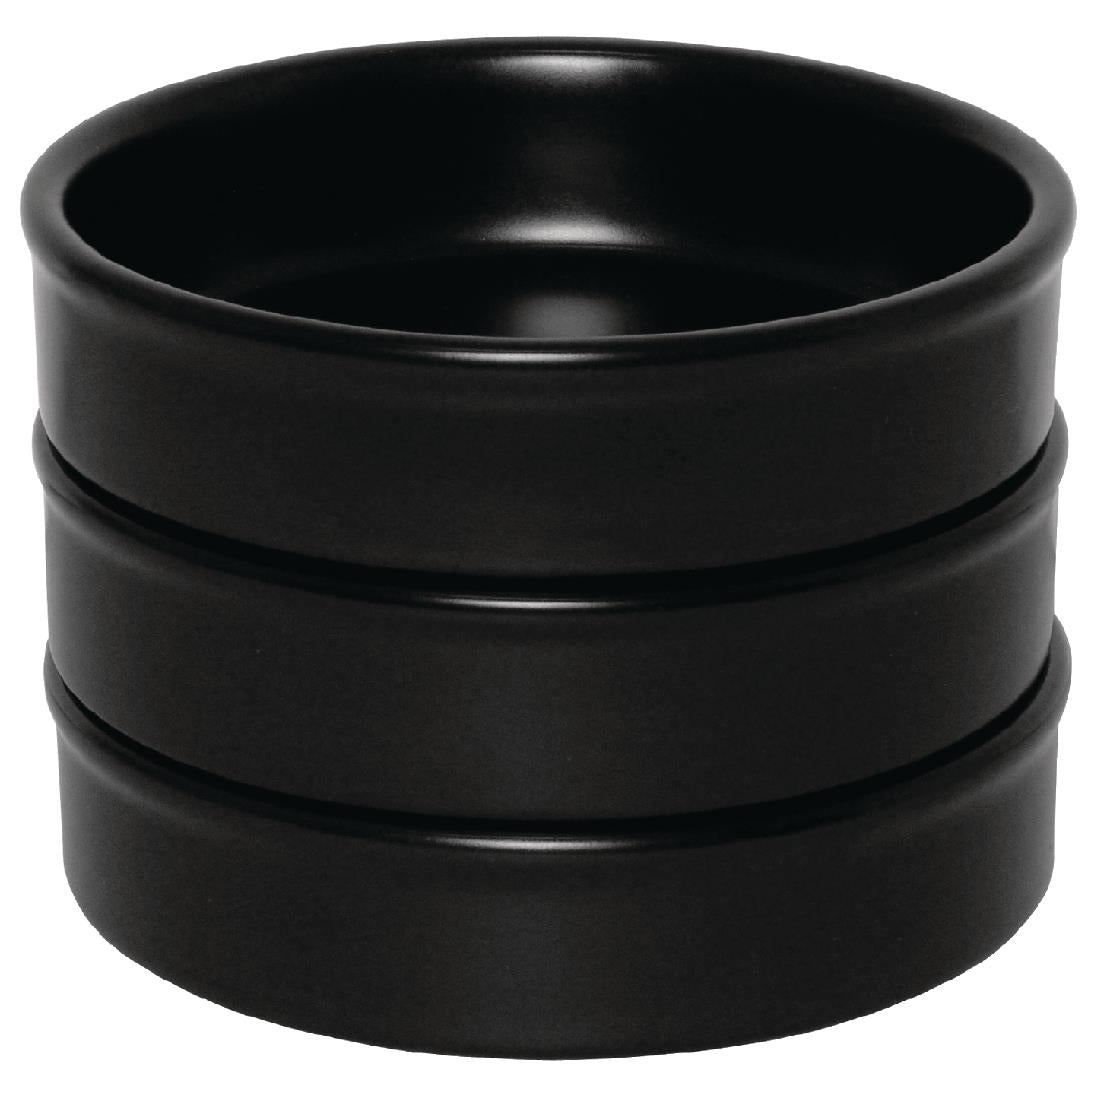 DK833 Olympia Mediterranean Stackable Dishes Black 134mm (Pack of 6) JD Catering Equipment Solutions Ltd